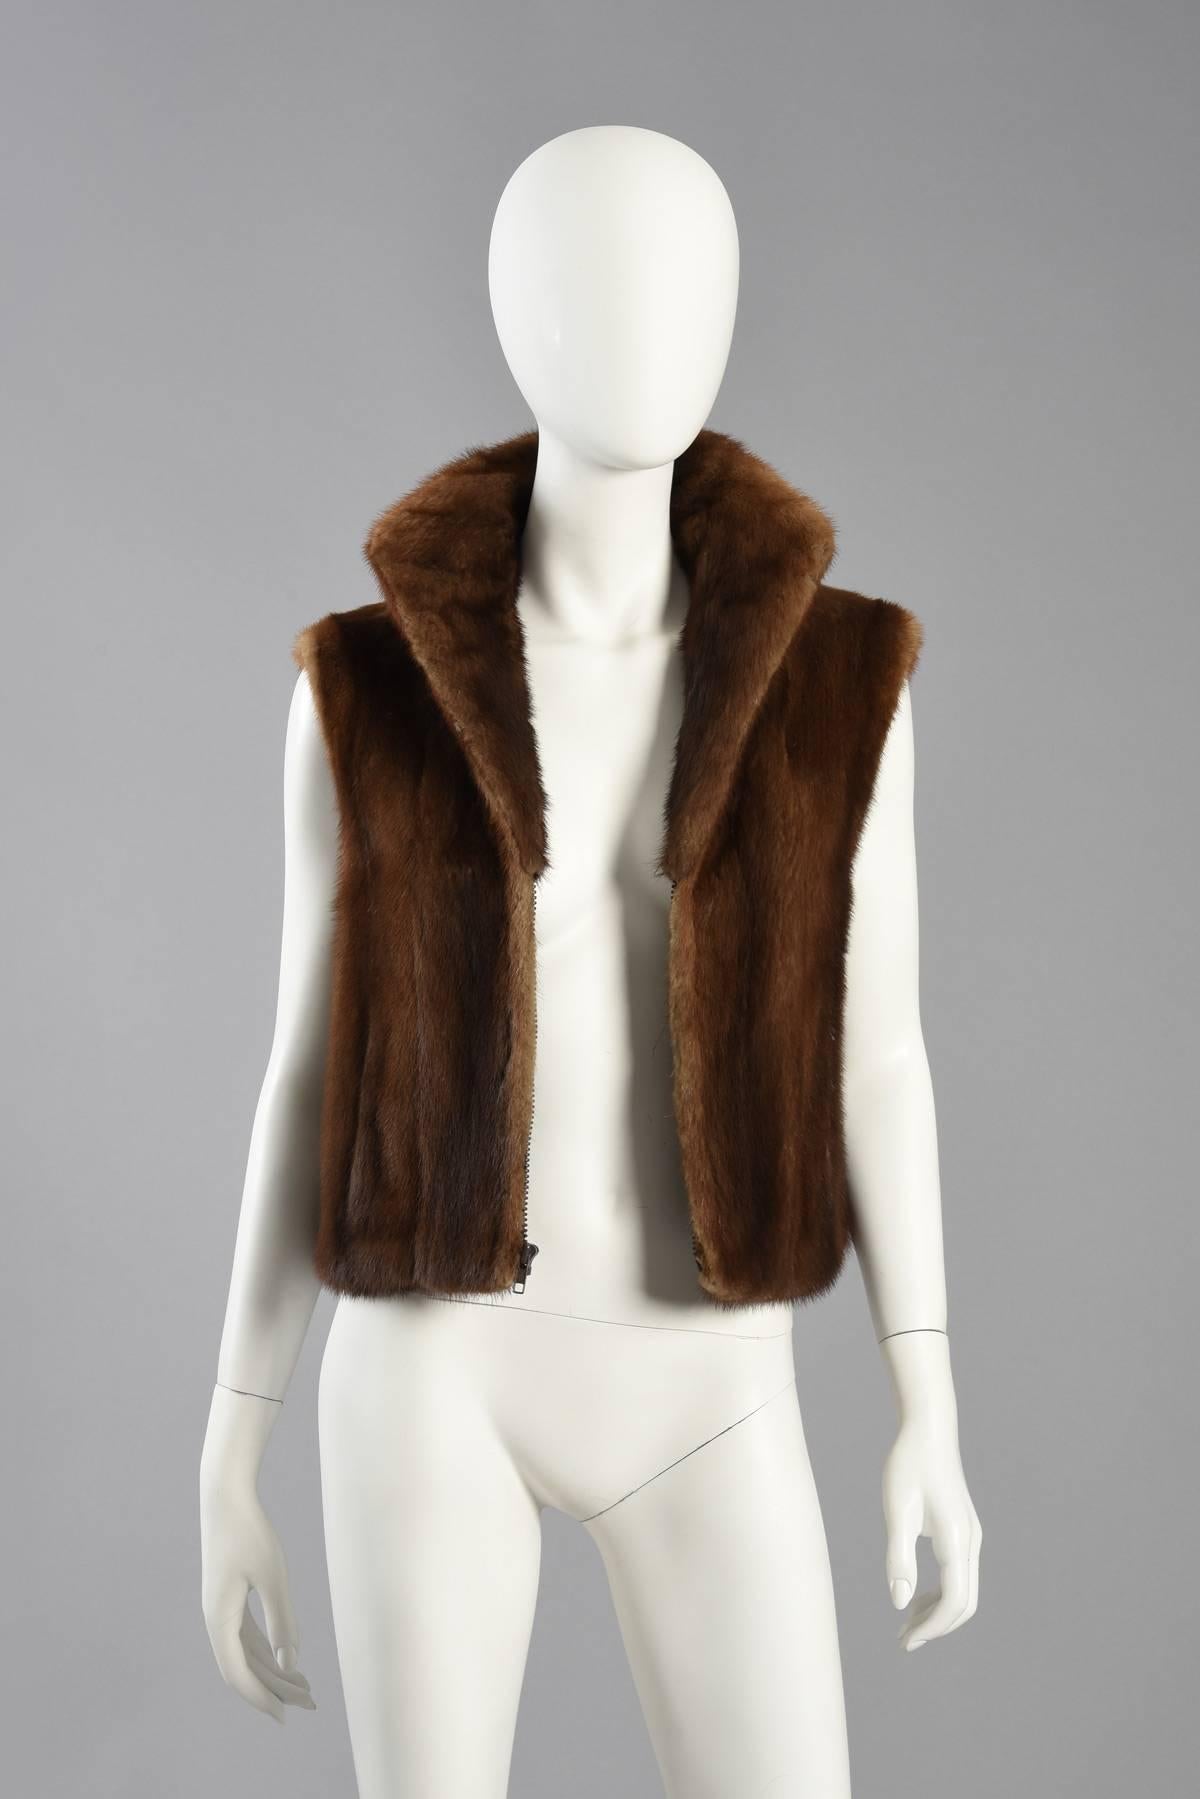 Killer Neiman Marcus genuine mink fur vest. Simple and chic, this piece is just as easy to style overtop of leather jackets and sweaters as it is to wear it on its own. Simple zip front with fur-backed collar that can be worn standing. Ultra wide,